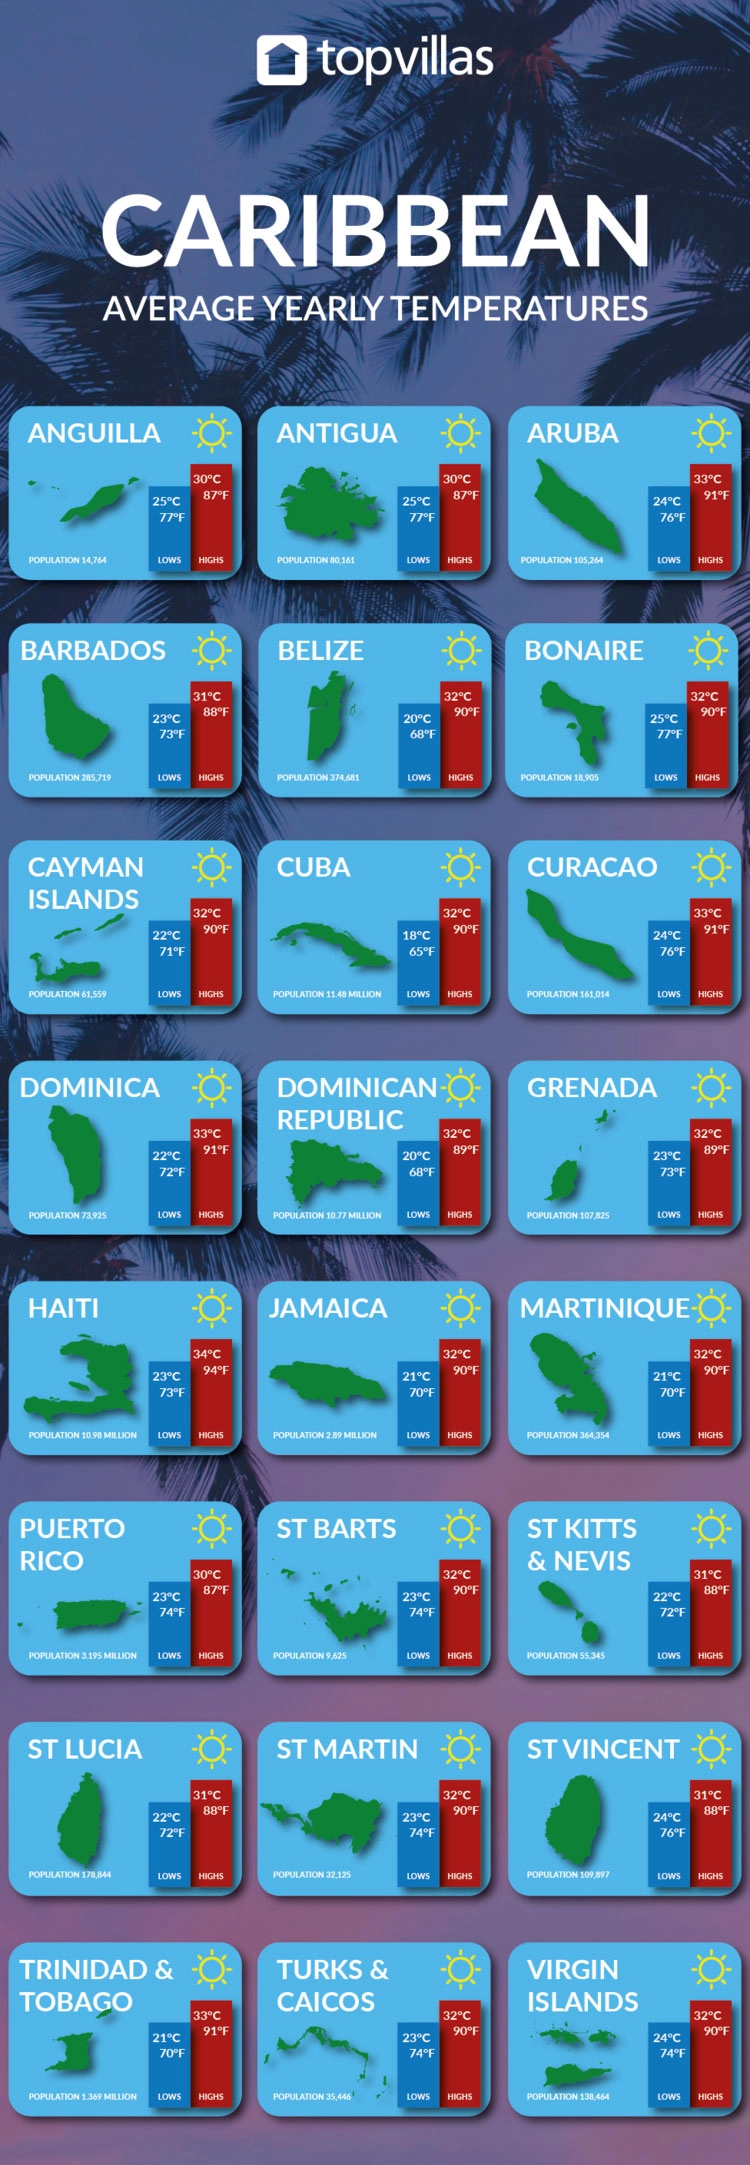 Infographic showing the best time to visit different Caribbean islands